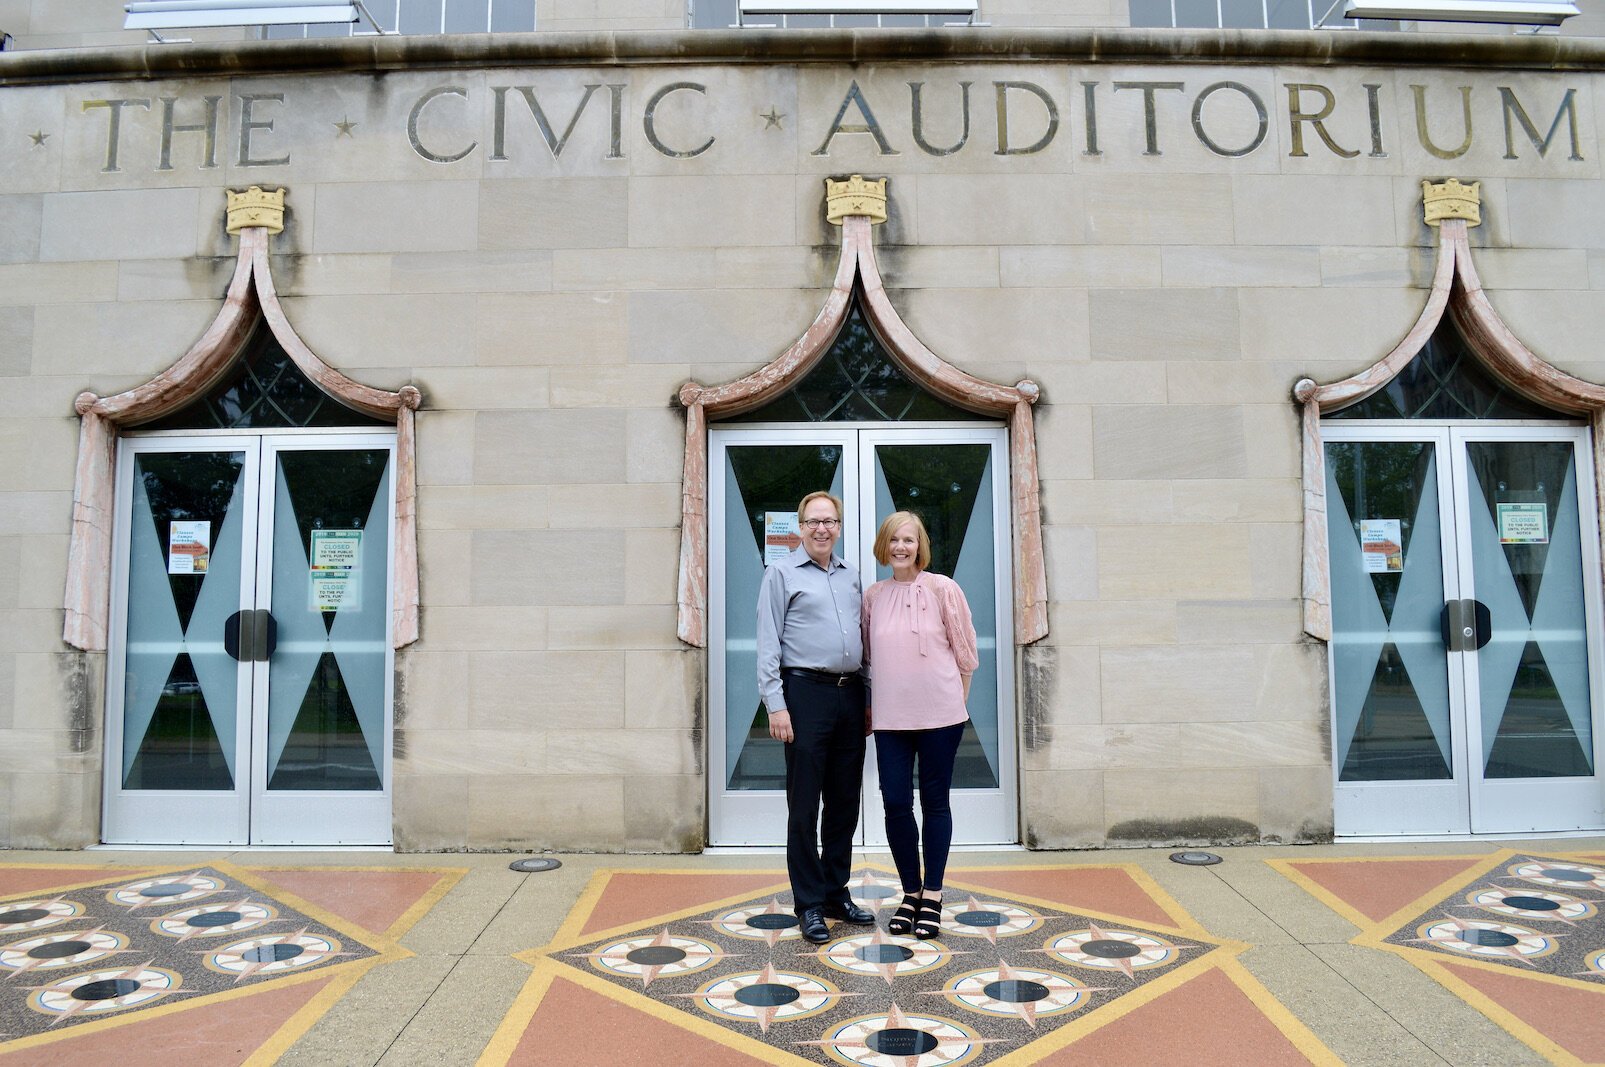  Zylman and Zervic are looking forward to "A Season of New Beginnings" when the Civic reopens.